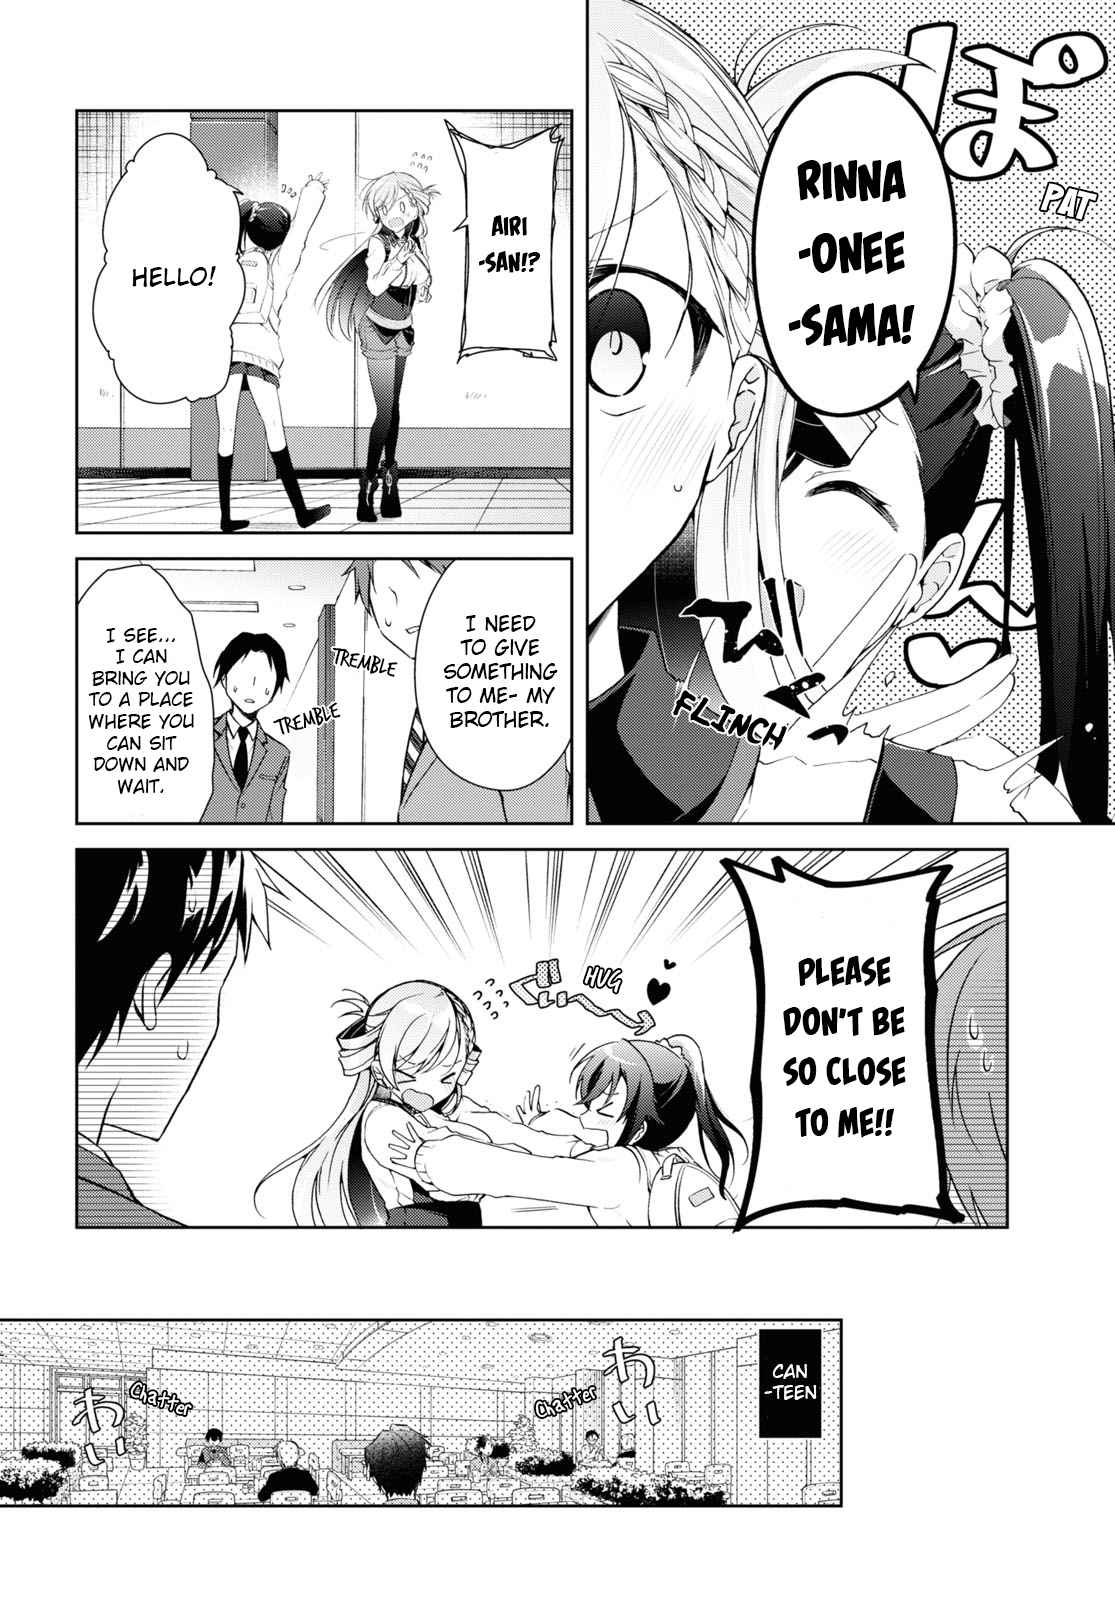 Isshiki-san Wants to Know About Love. - chapter 9 - #6